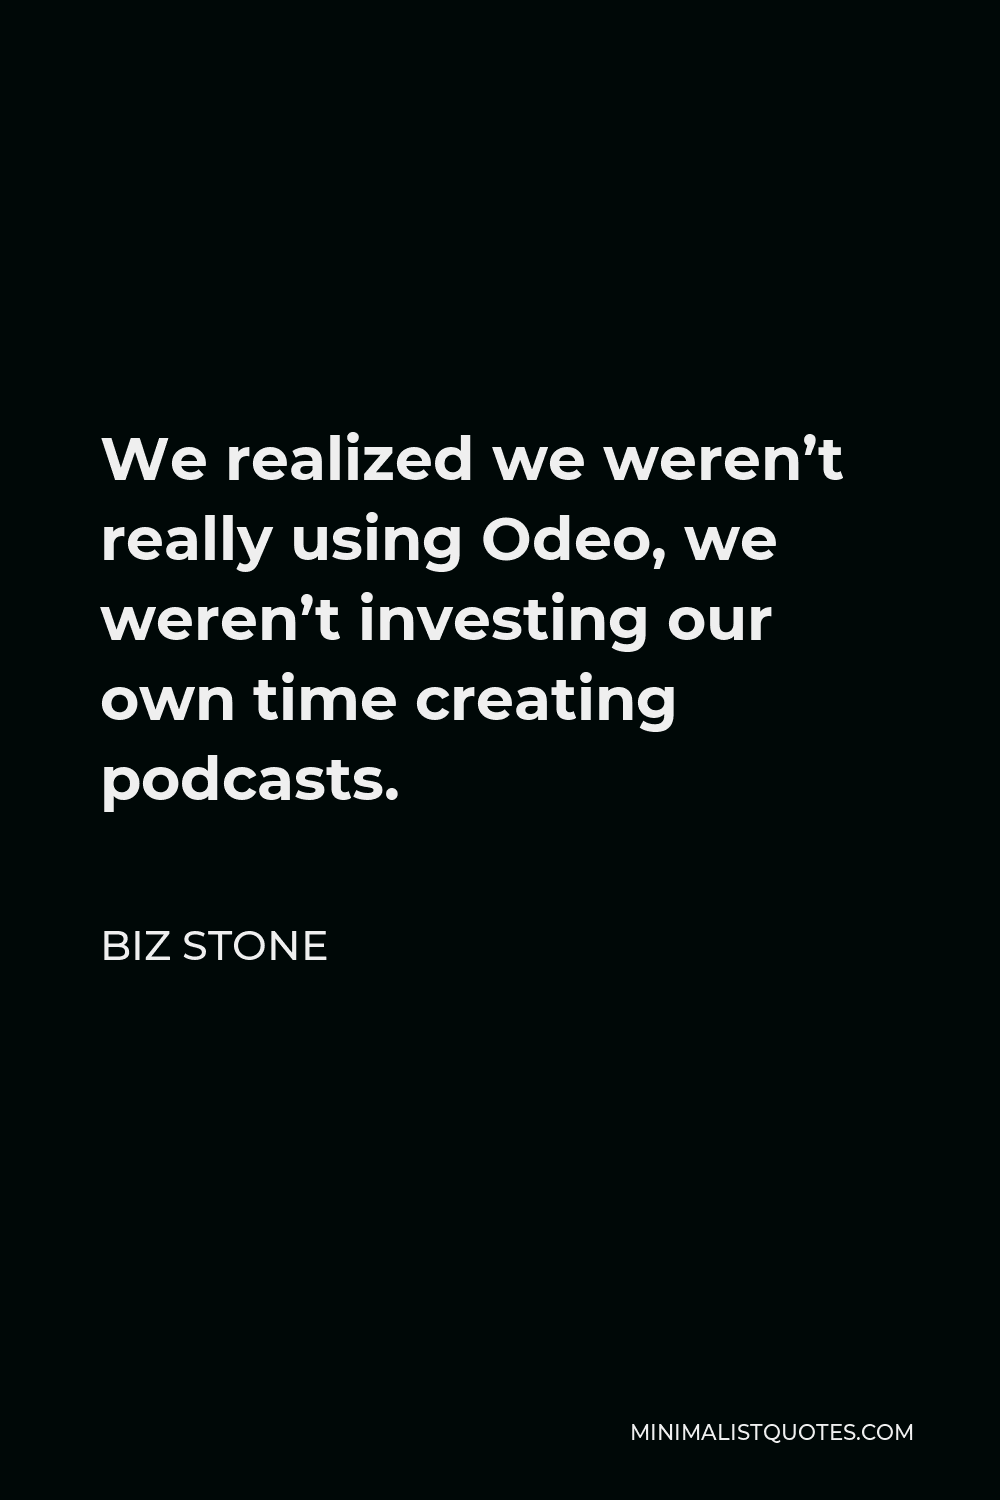 Biz Stone Quote - We realized we weren’t really using Odeo, we weren’t investing our own time creating podcasts.